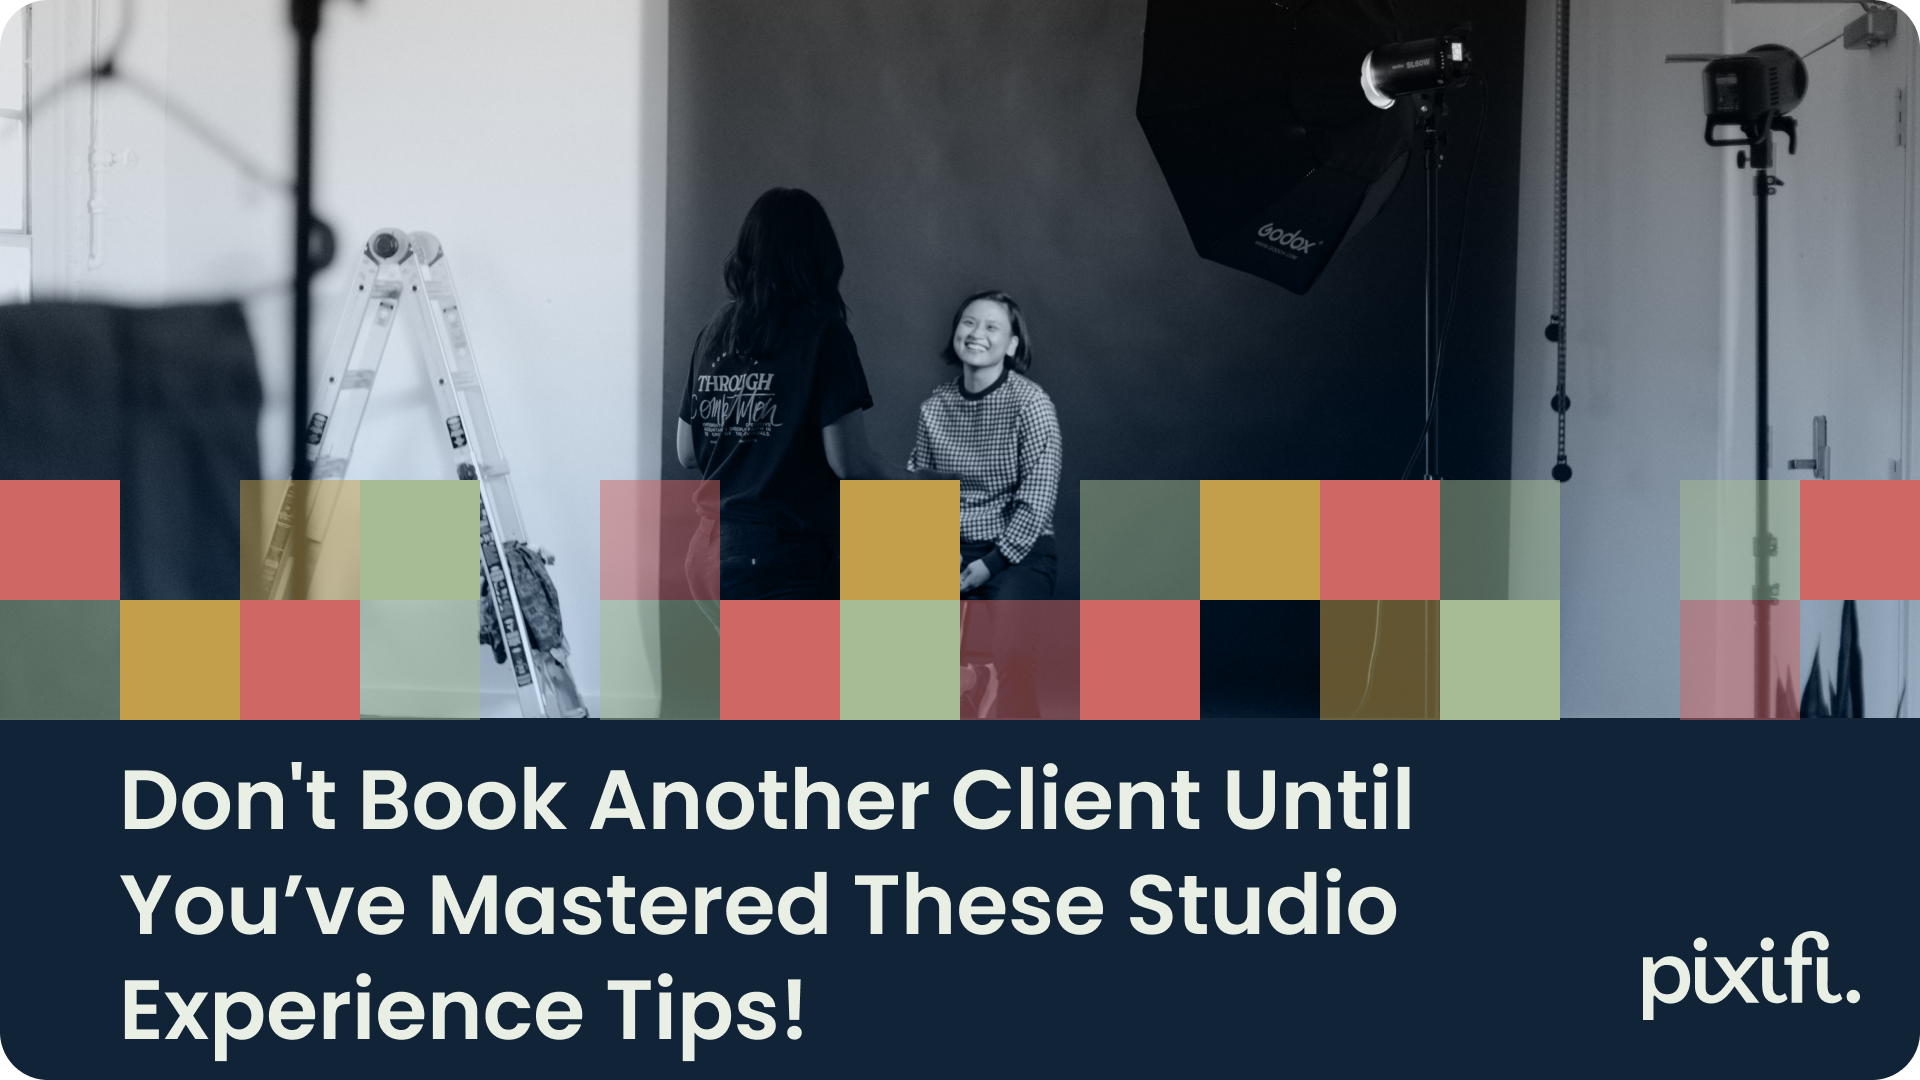 Don't Book Another Client Until You’ve Mastered These Studio Experience Tips!